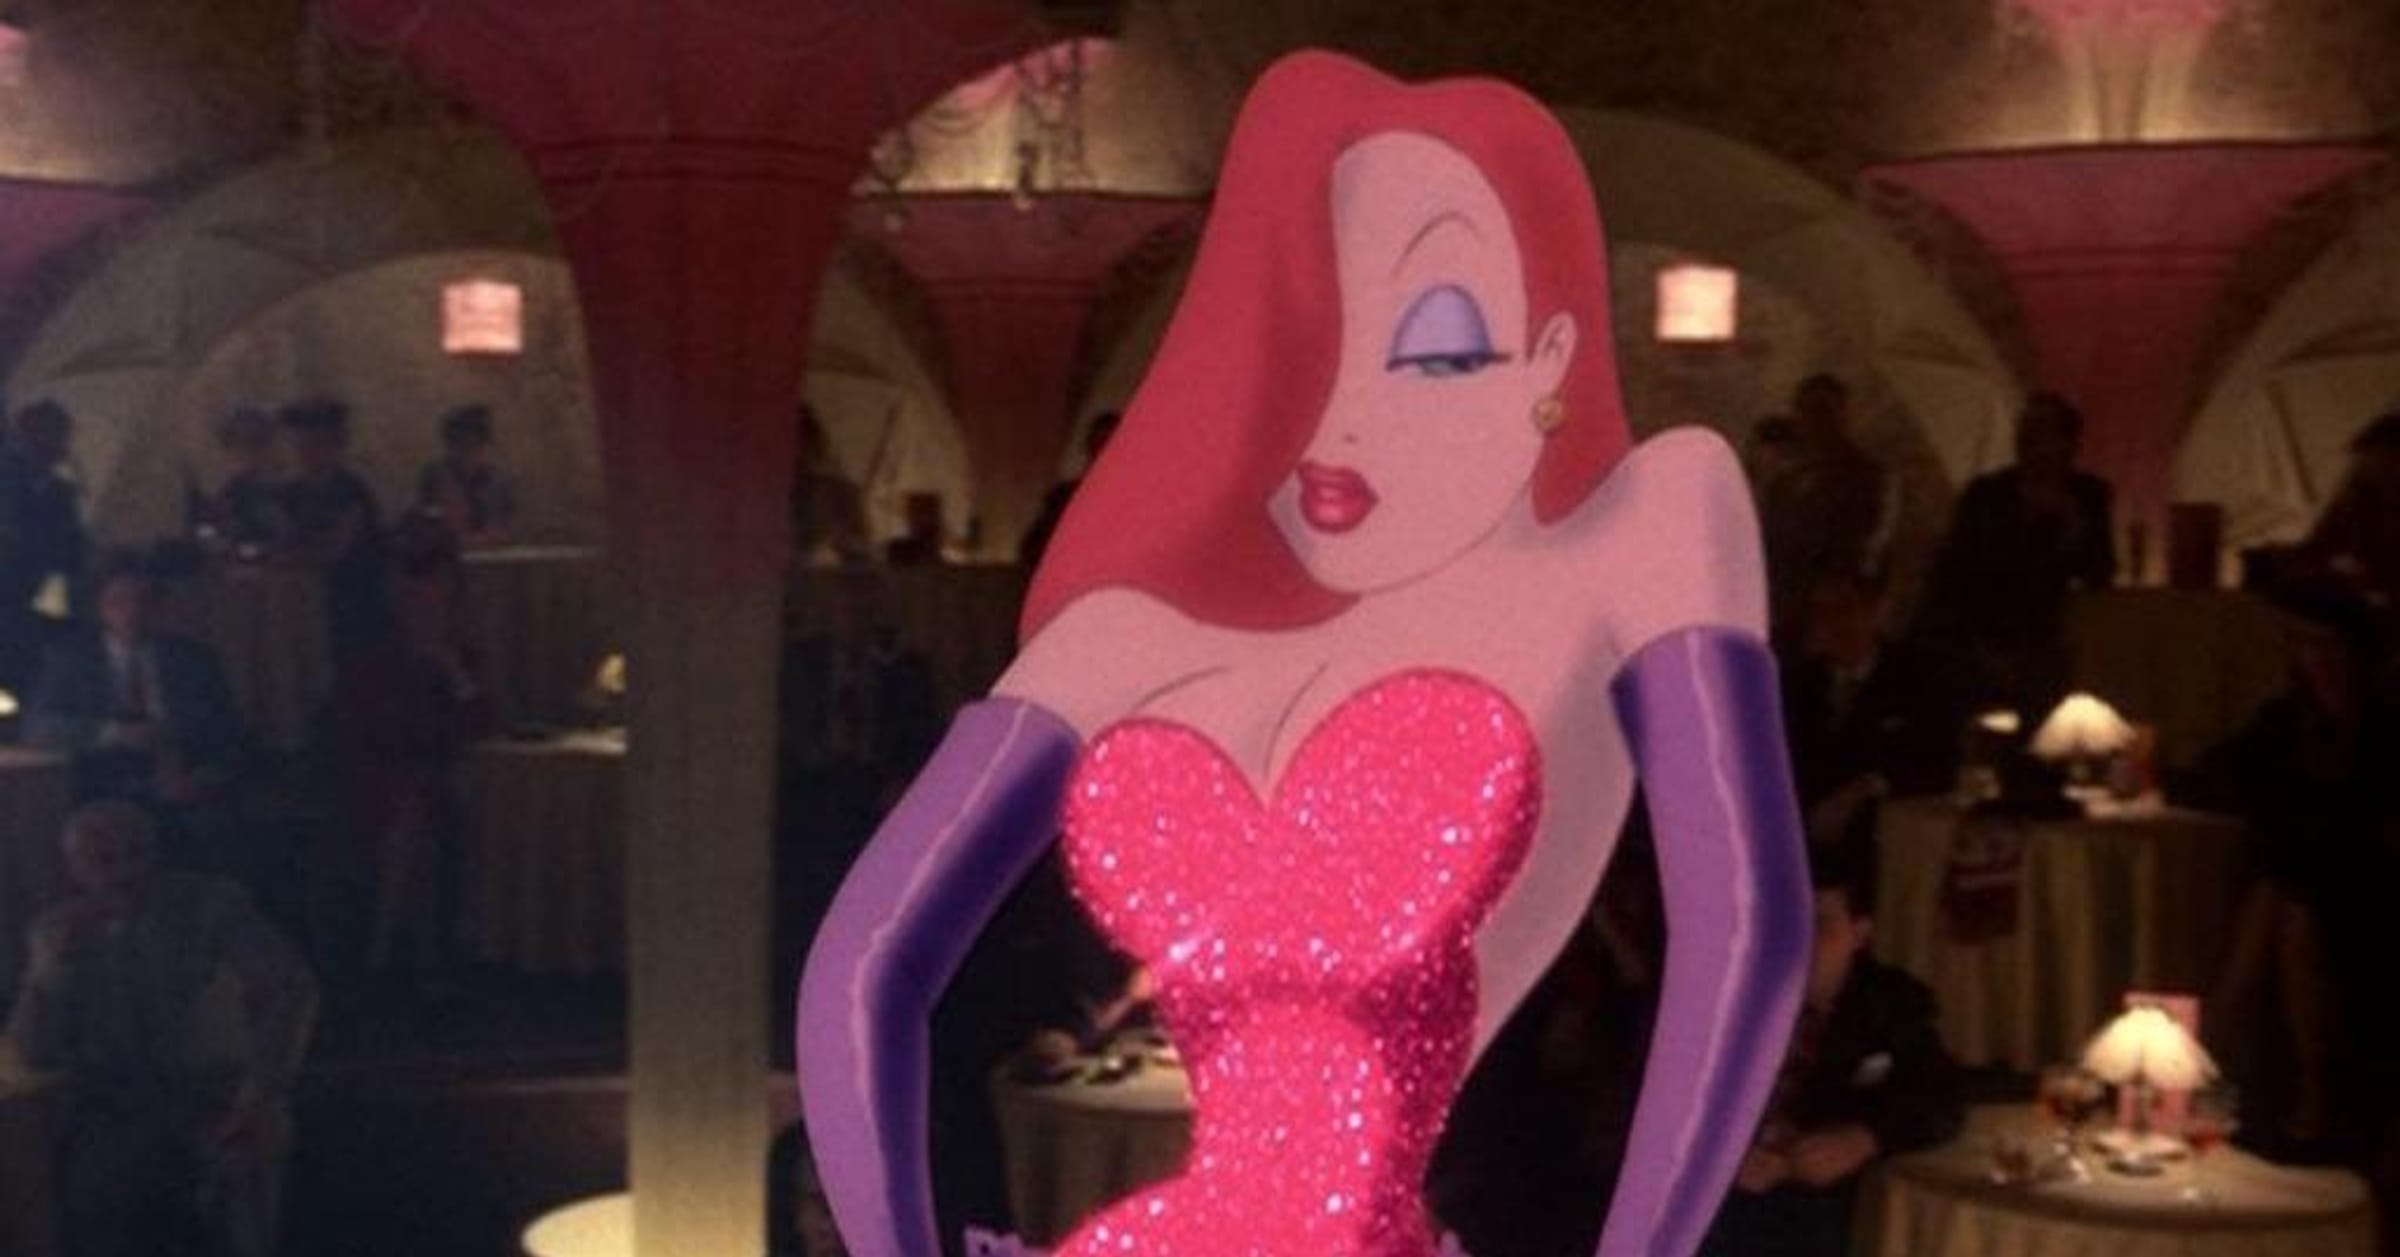 50 iconic female cartoon characters many people know and love 